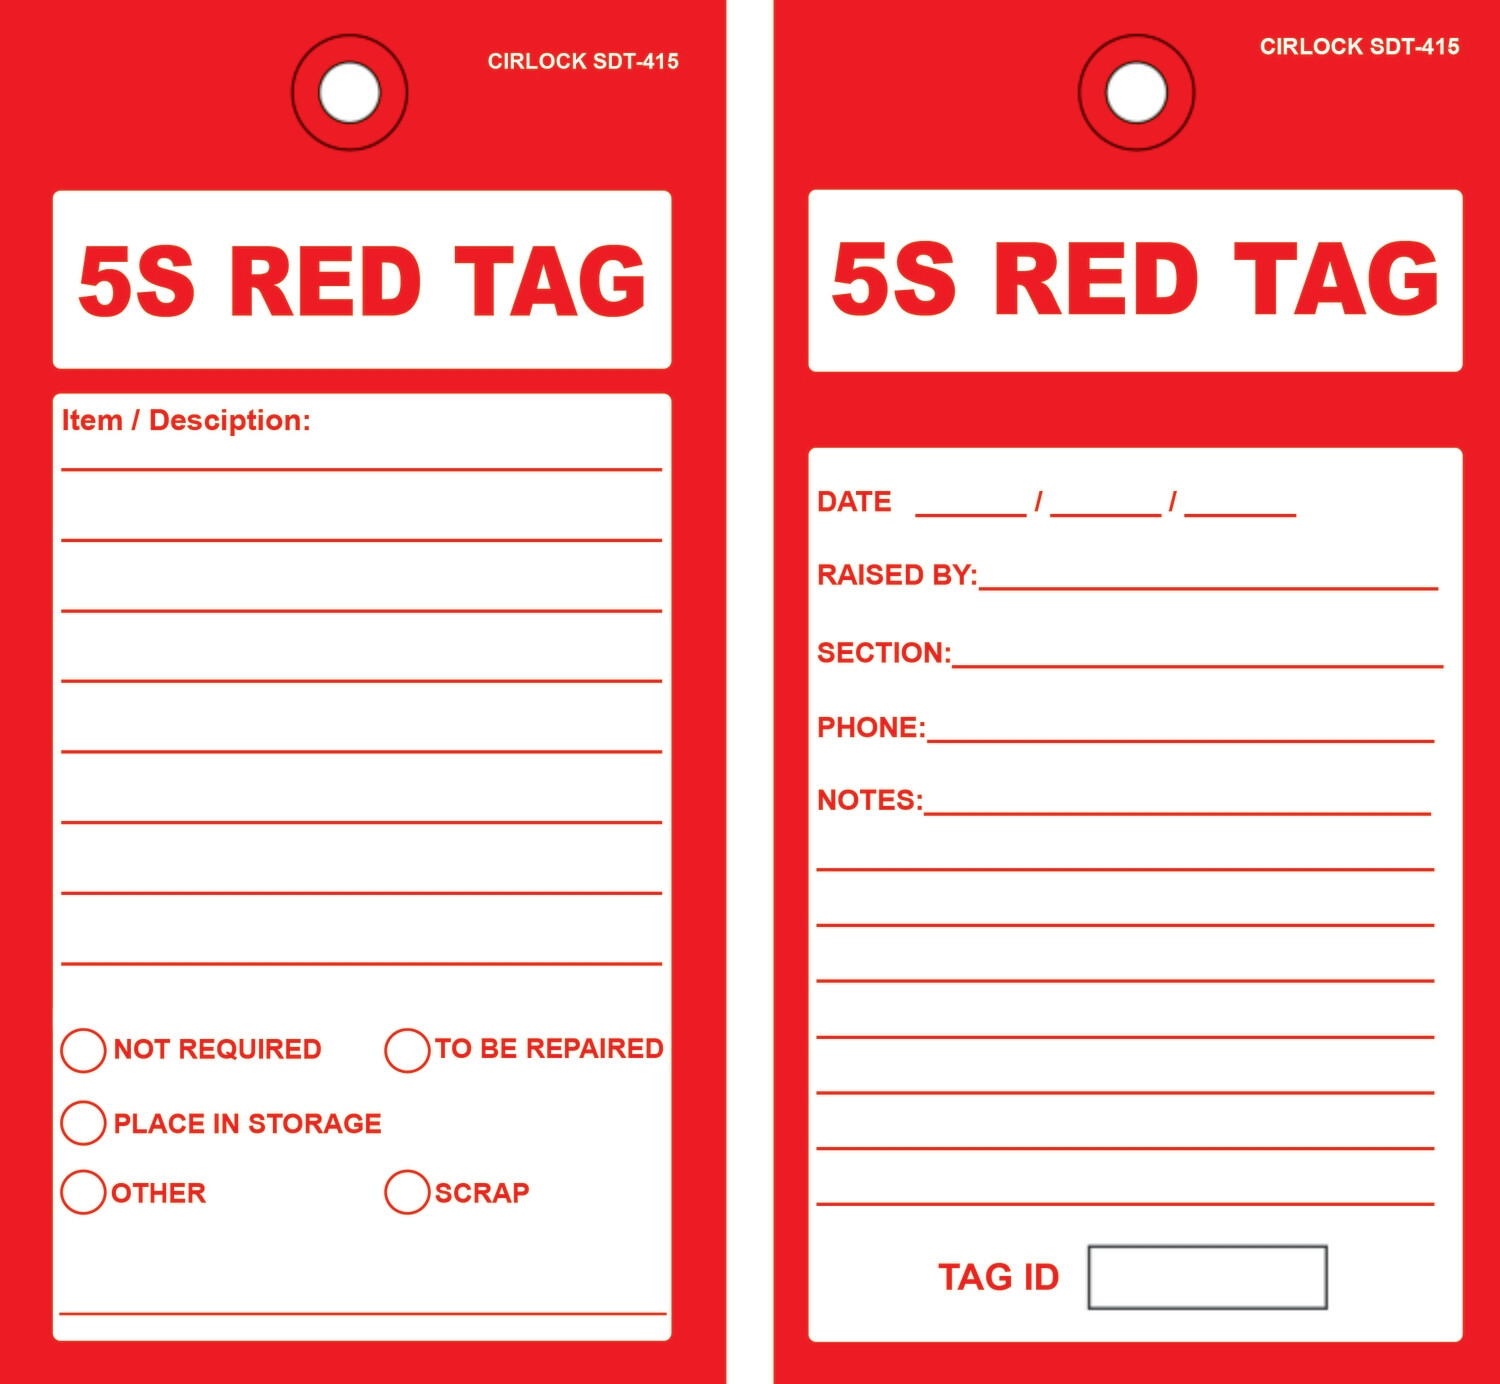 5S RED TAG